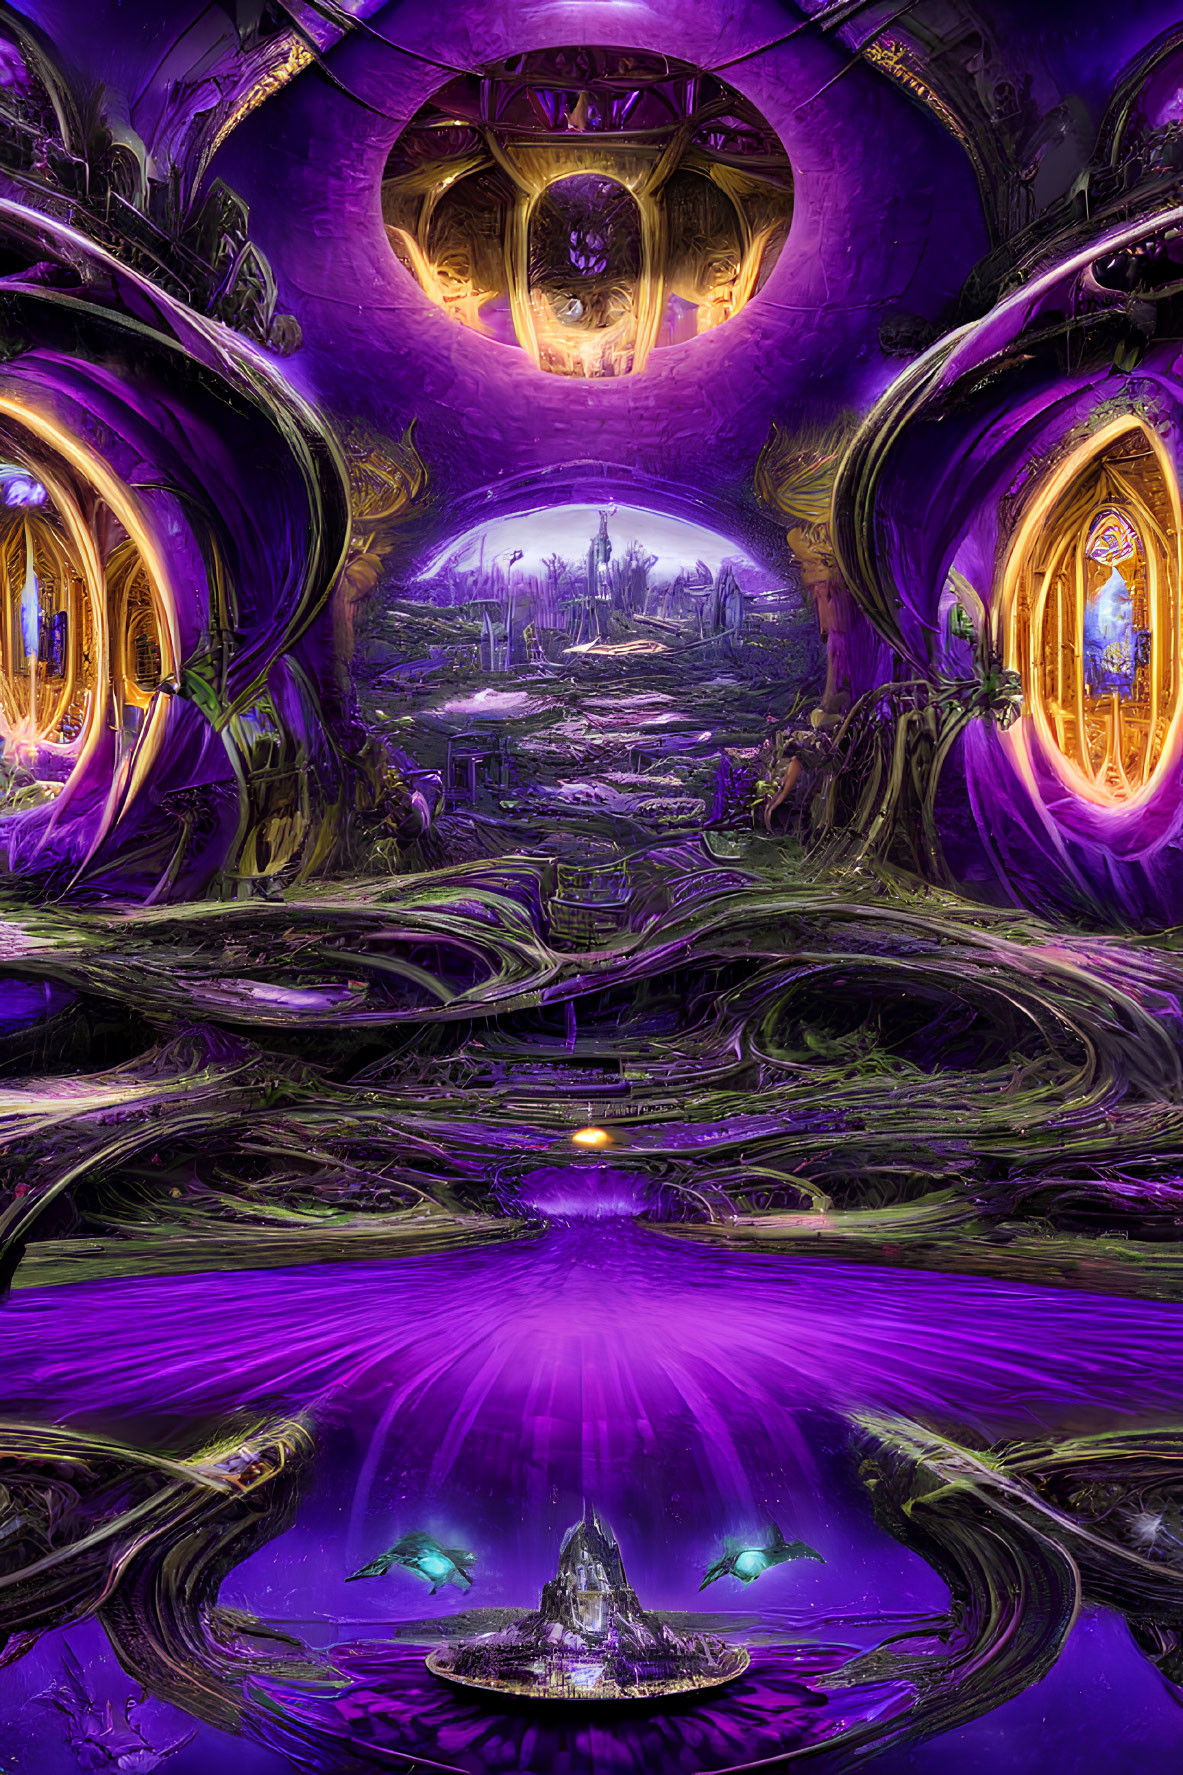 Futuristic alien city with purple and golden hues and advanced architecture